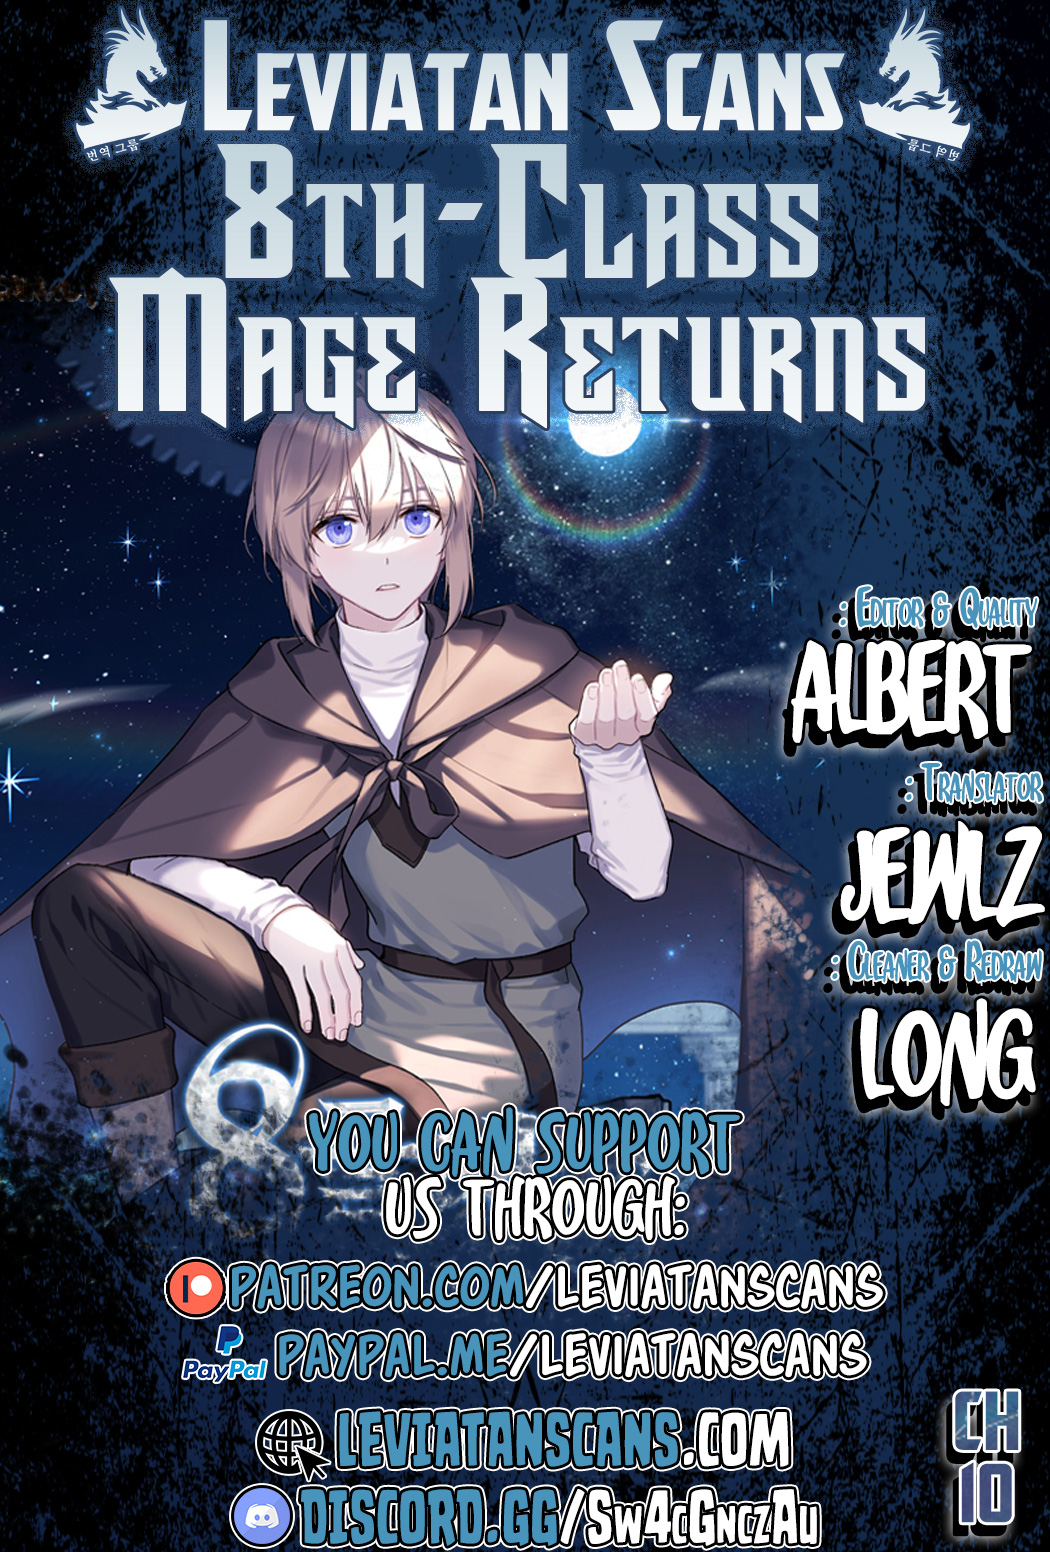 Return of the 8th Class Magician - Chapter 7129 - Image 1